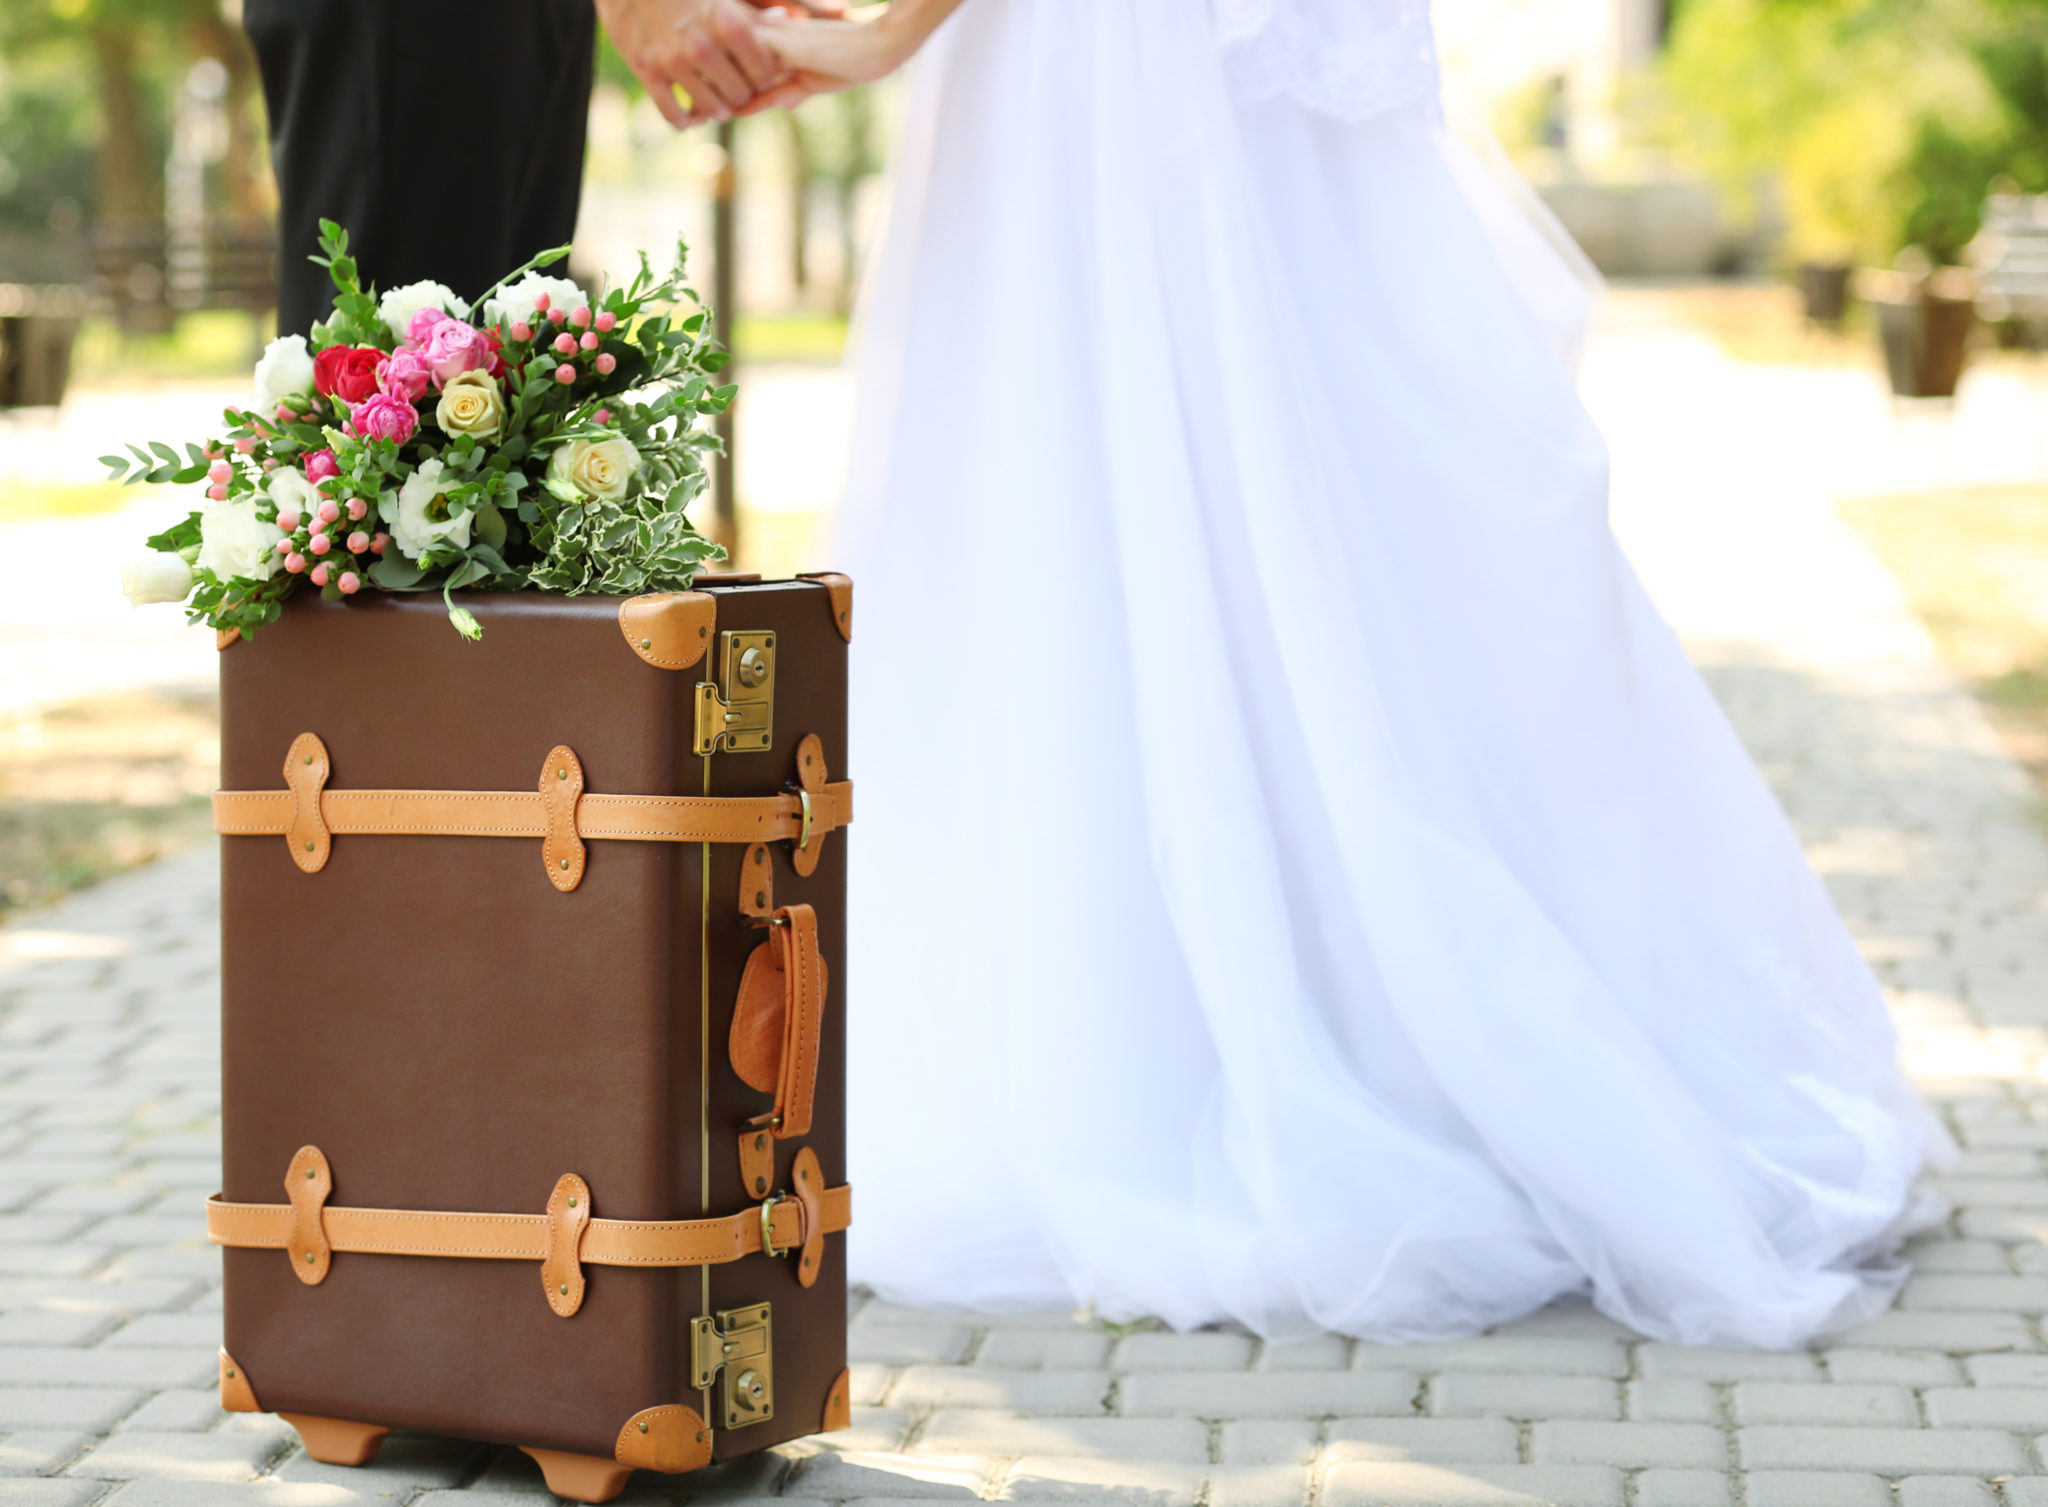 Traveling with your wedding dress